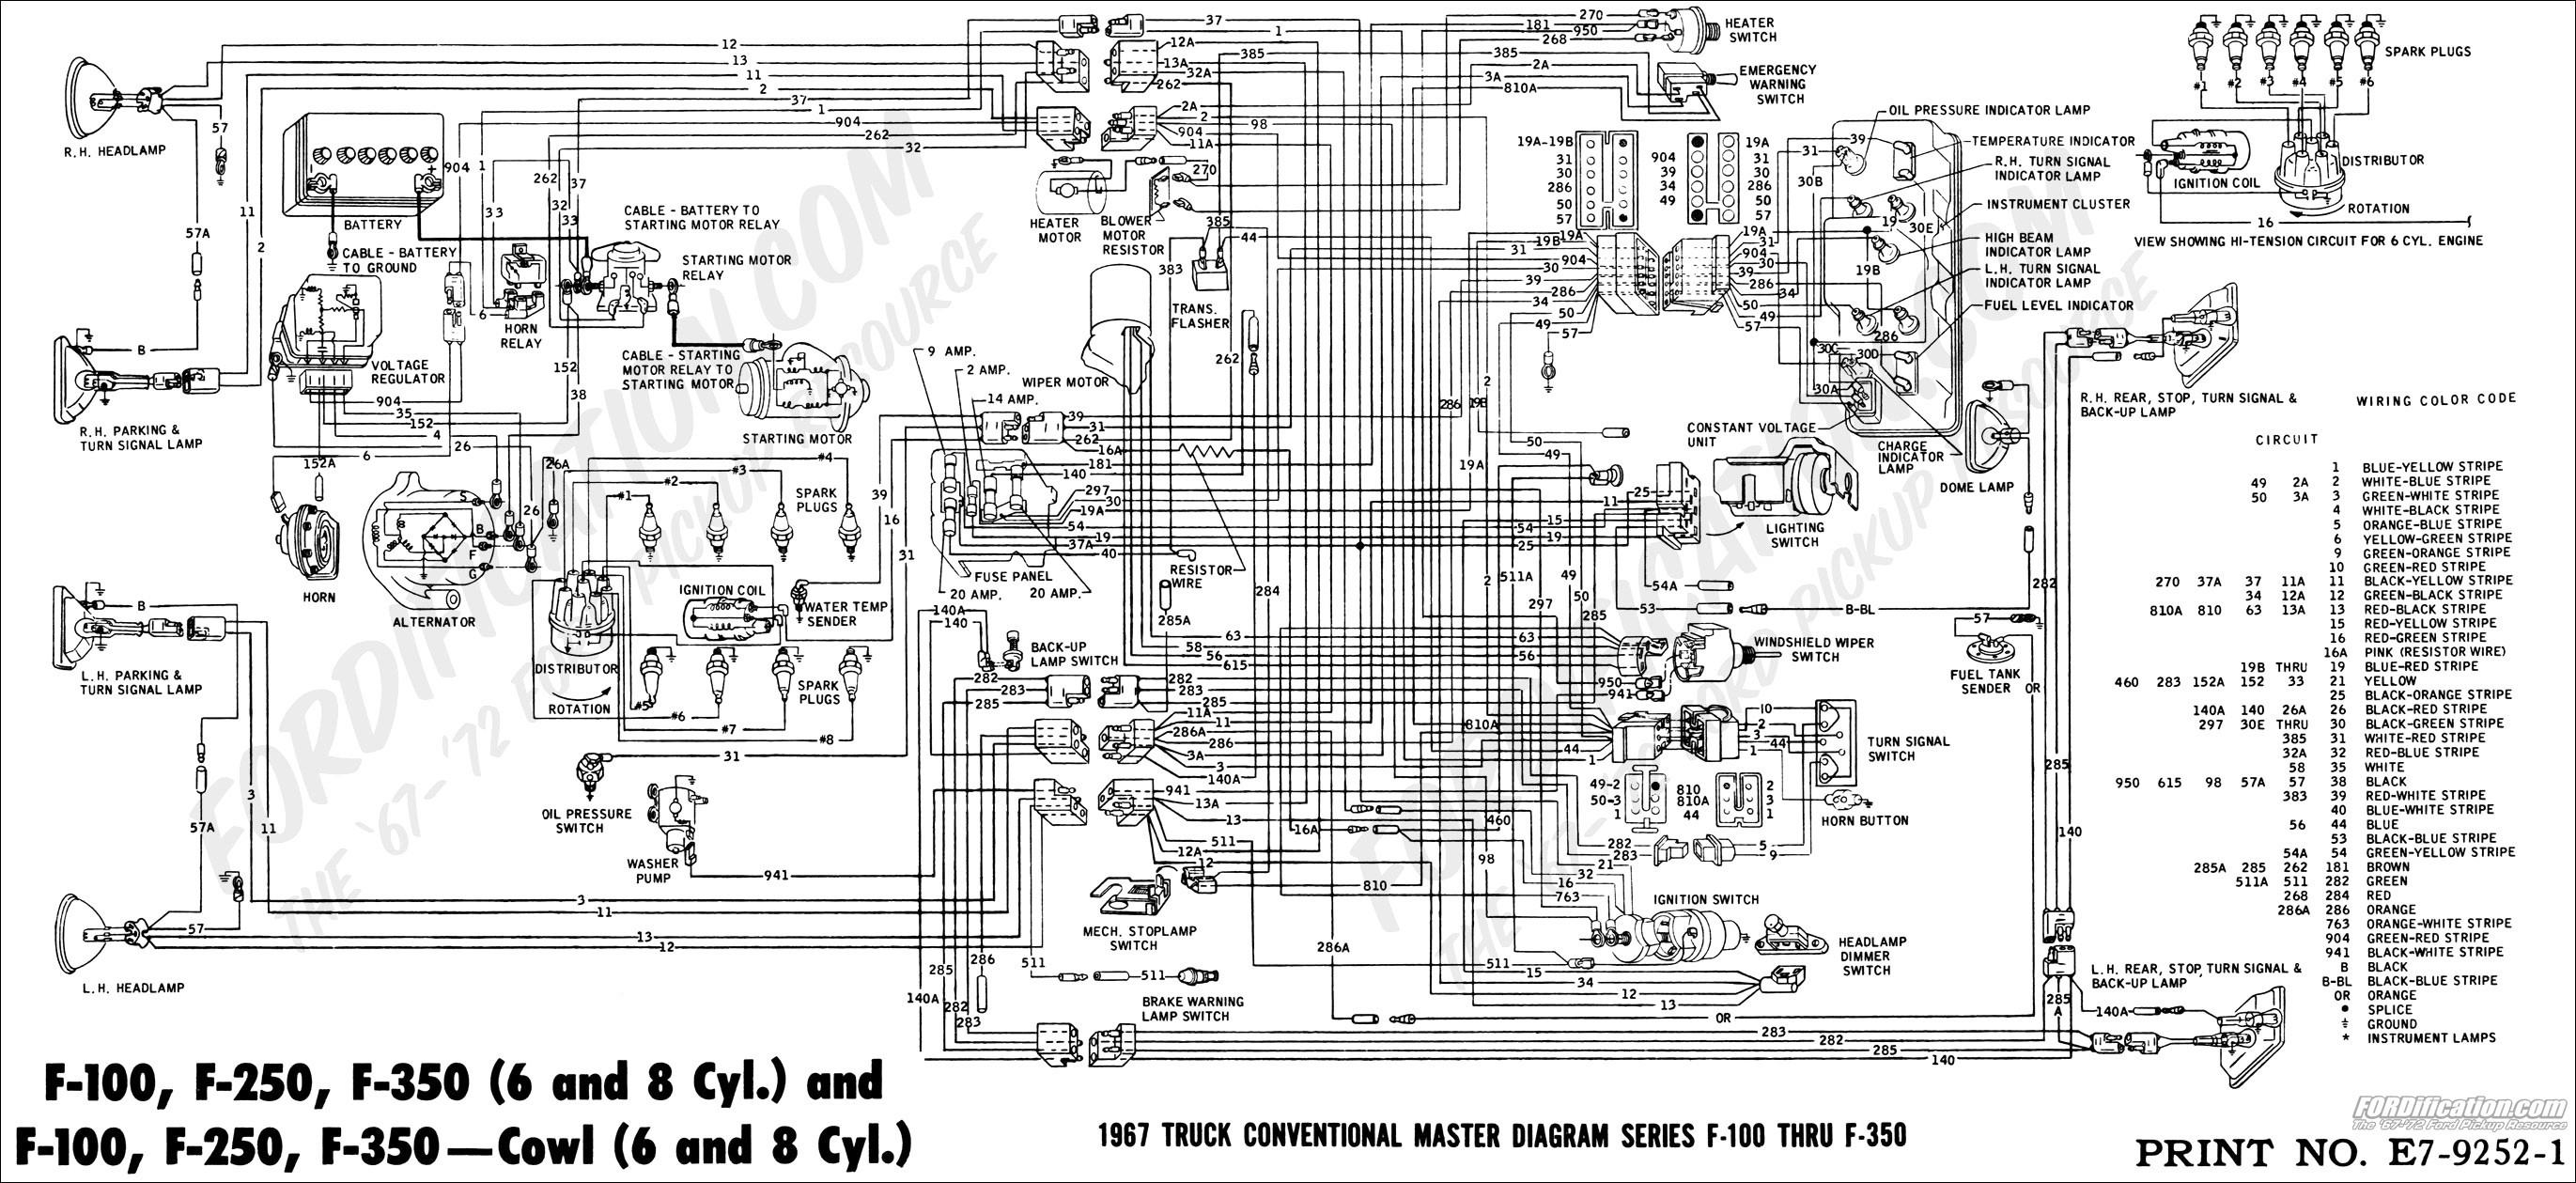 Ford F250 Parts Diagram 1999 ford Truck Wiring Diagram Wiring Data Of Ford F250 Parts Diagram